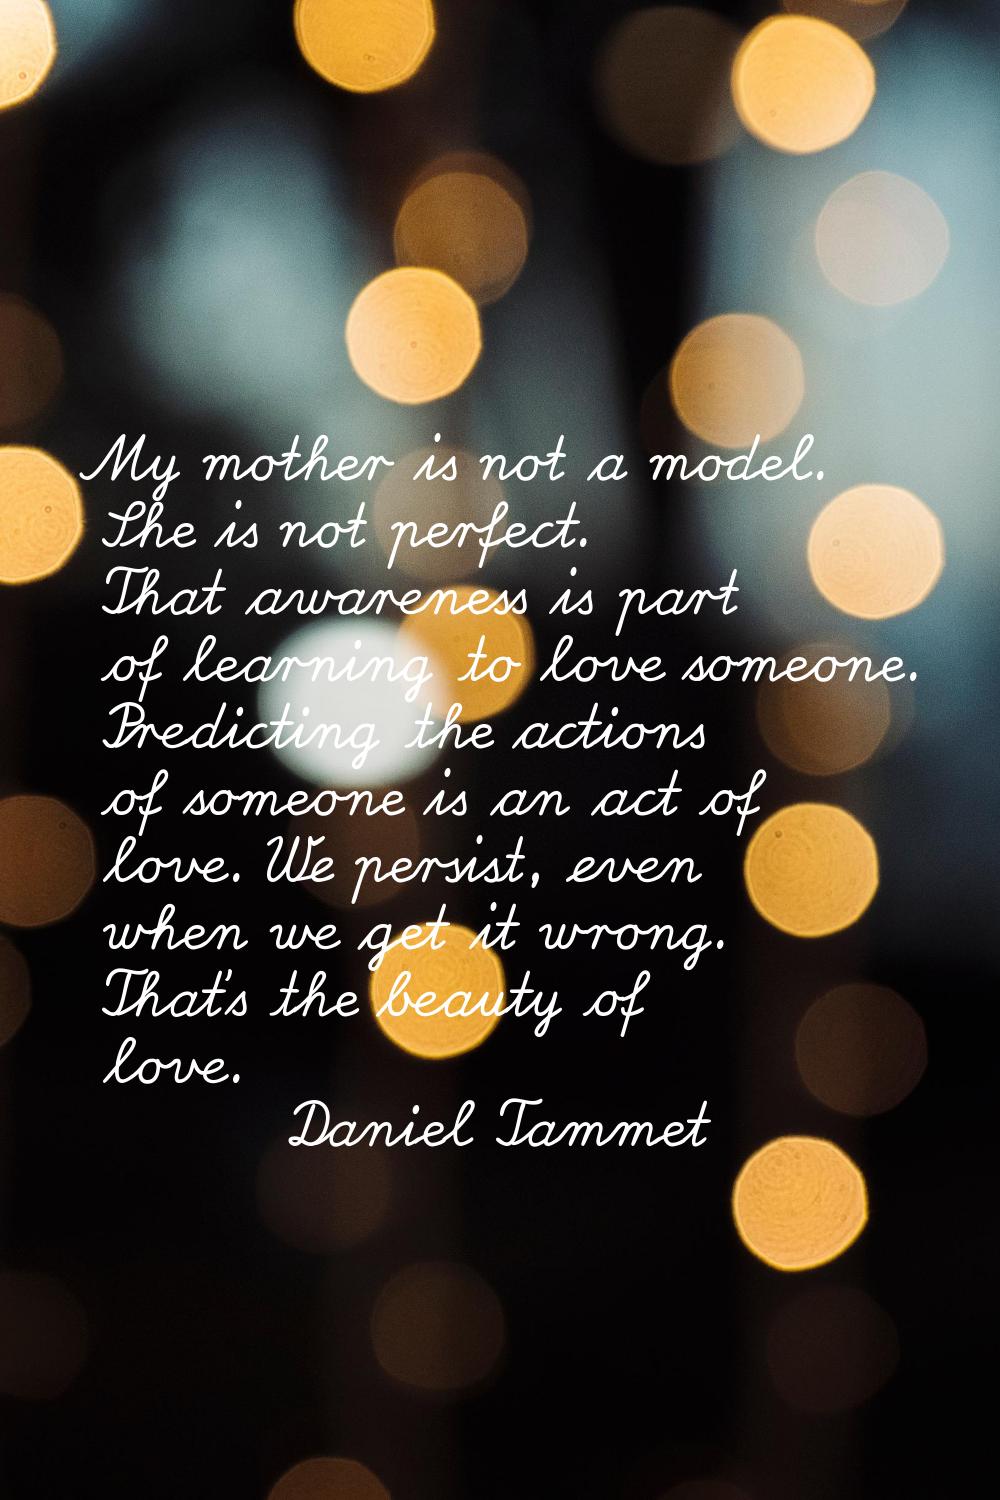 My mother is not a model. She is not perfect. That awareness is part of learning to love someone. P